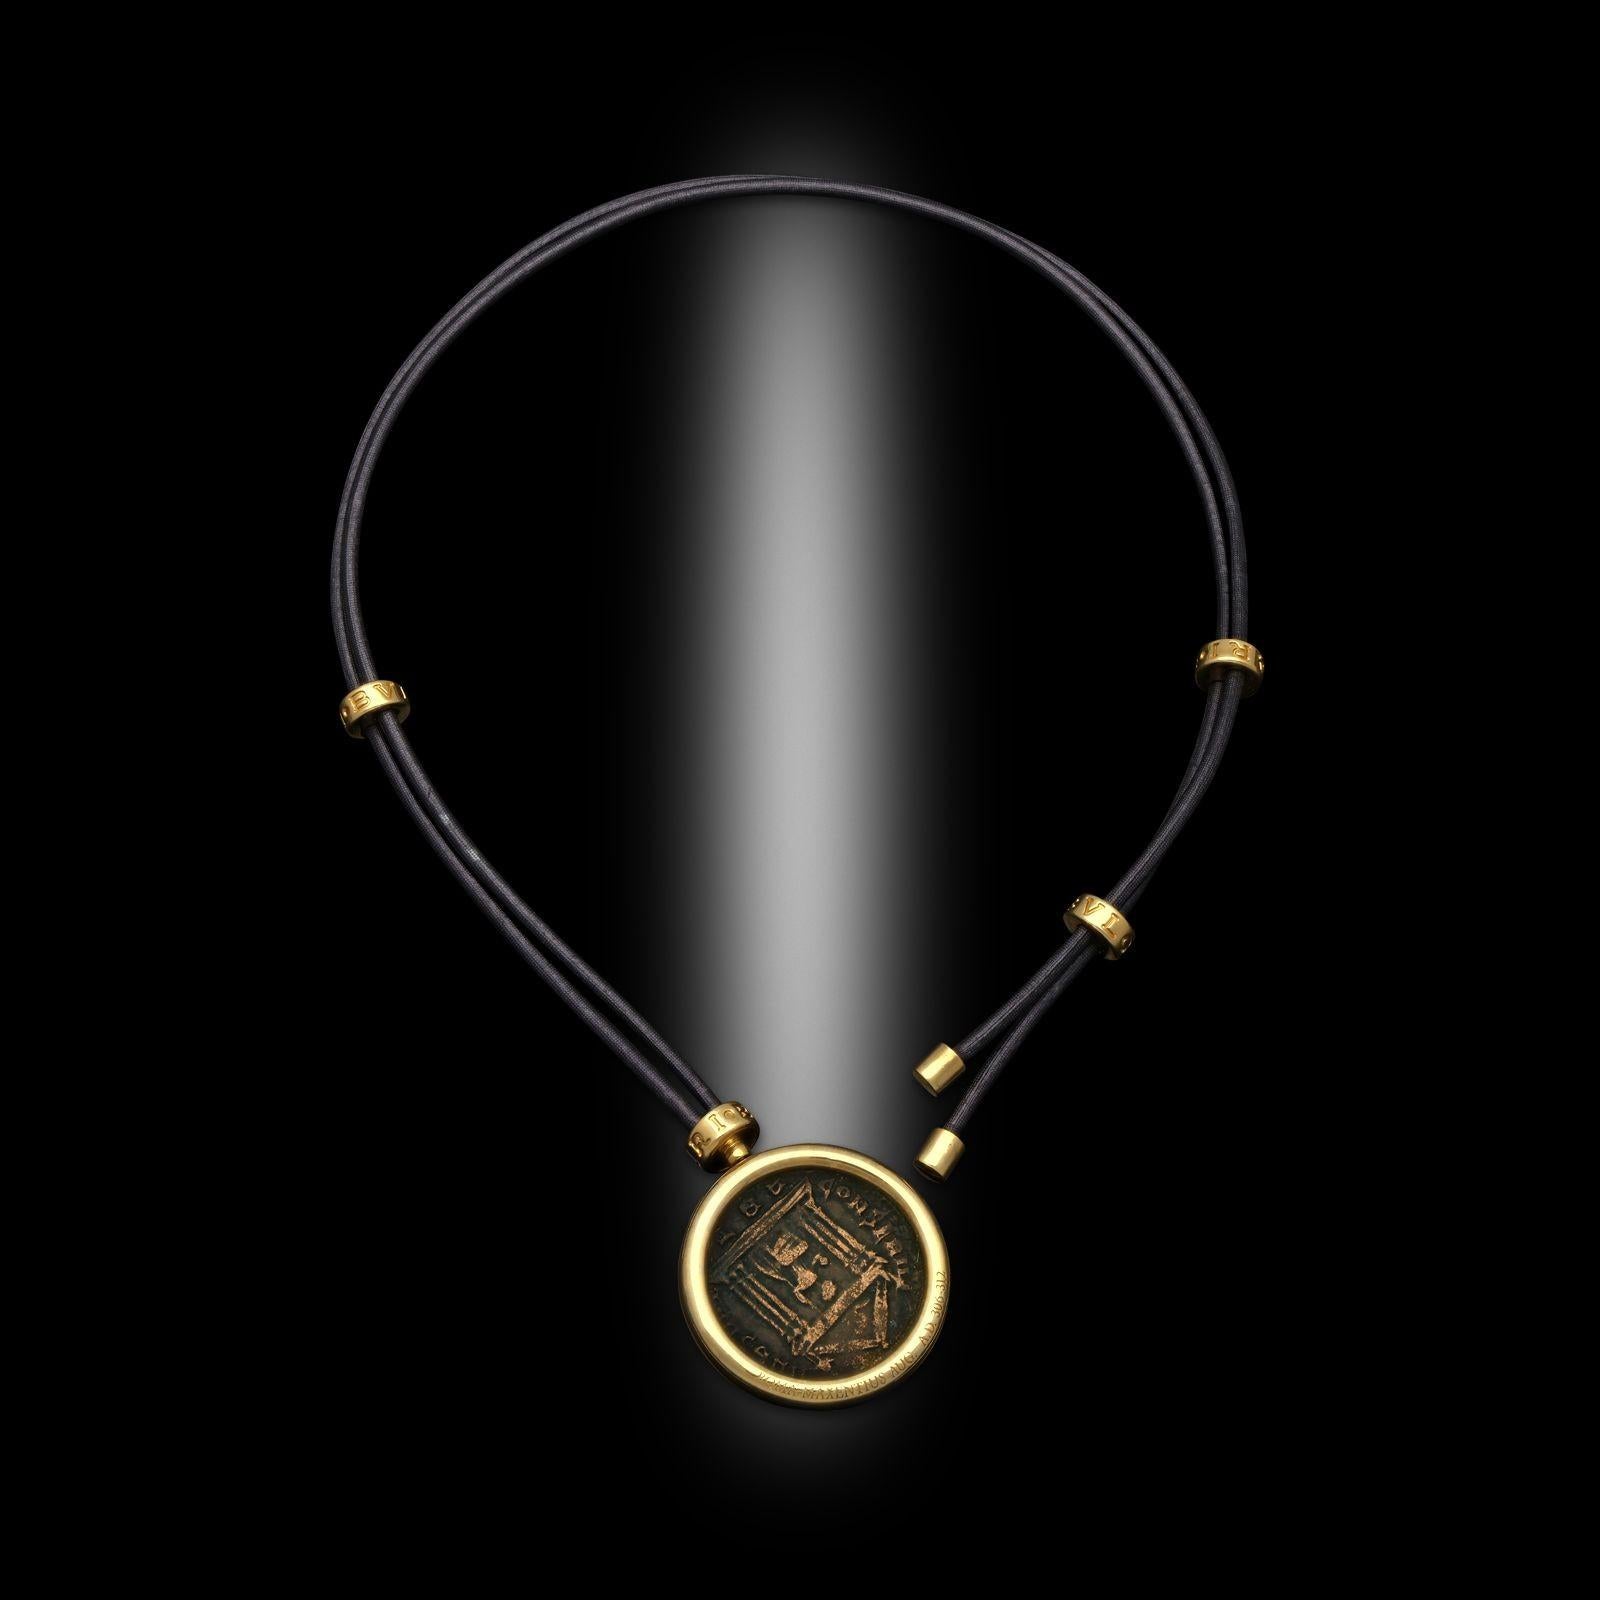 A vintage Monete pendant by Bulgari, 1990s. This necklace has a single bronze ancient Roman coin set into a rounded 18ct yellow gold bezel setting. The coin is suspended from a black leather cord which can be adjusted by three moveable 18ct yellow